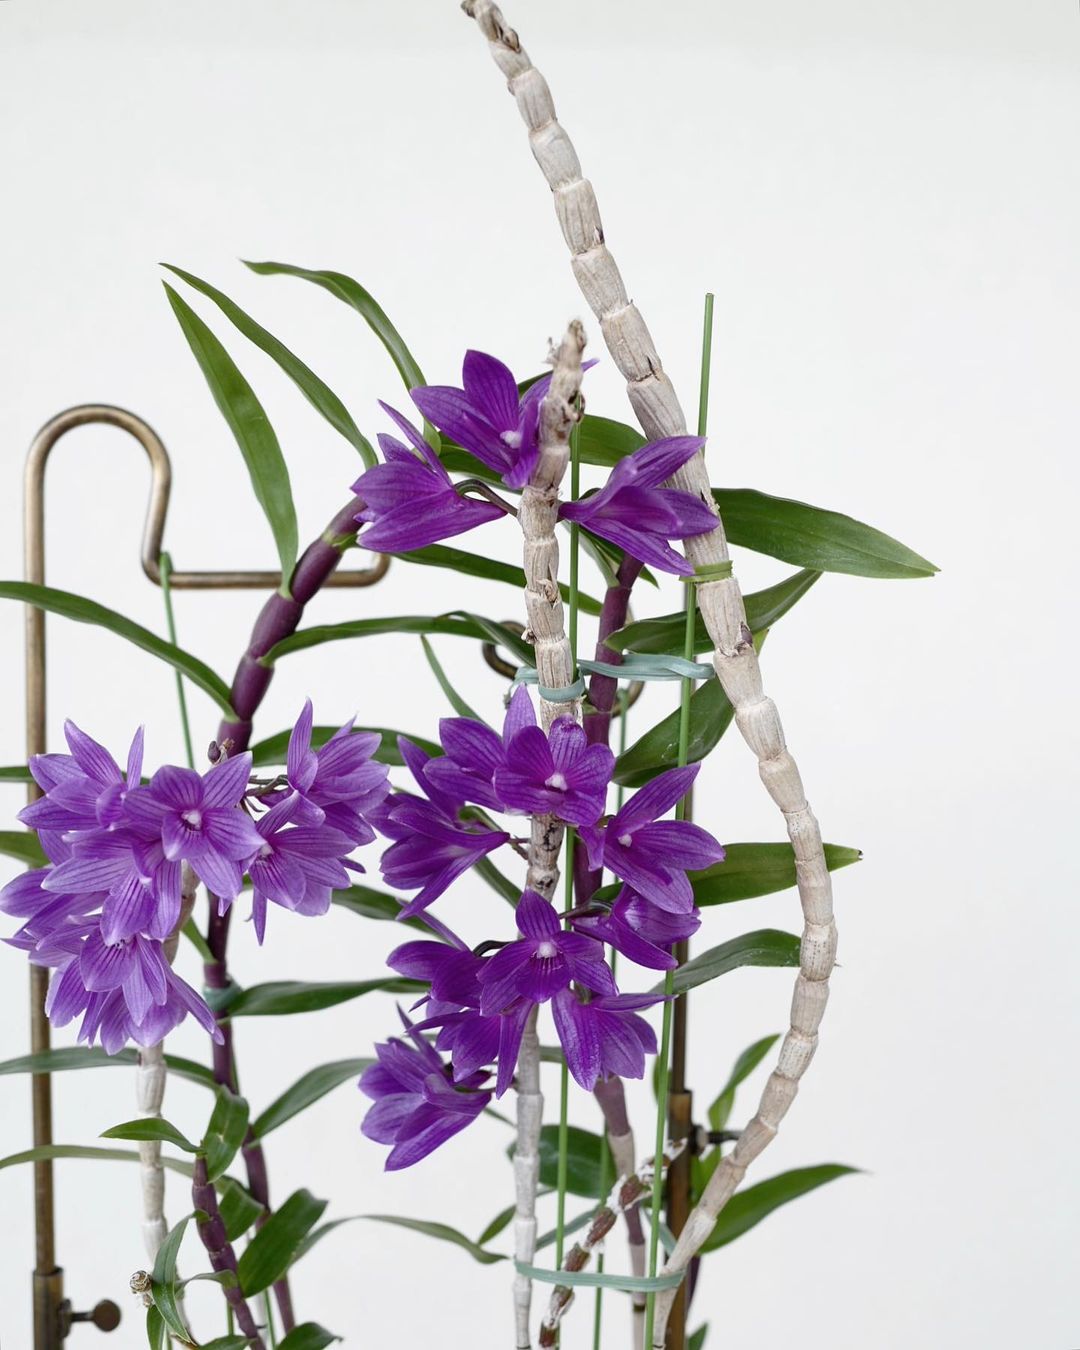 40 Most Popular Types Of Dendrobium Pictorial Guide